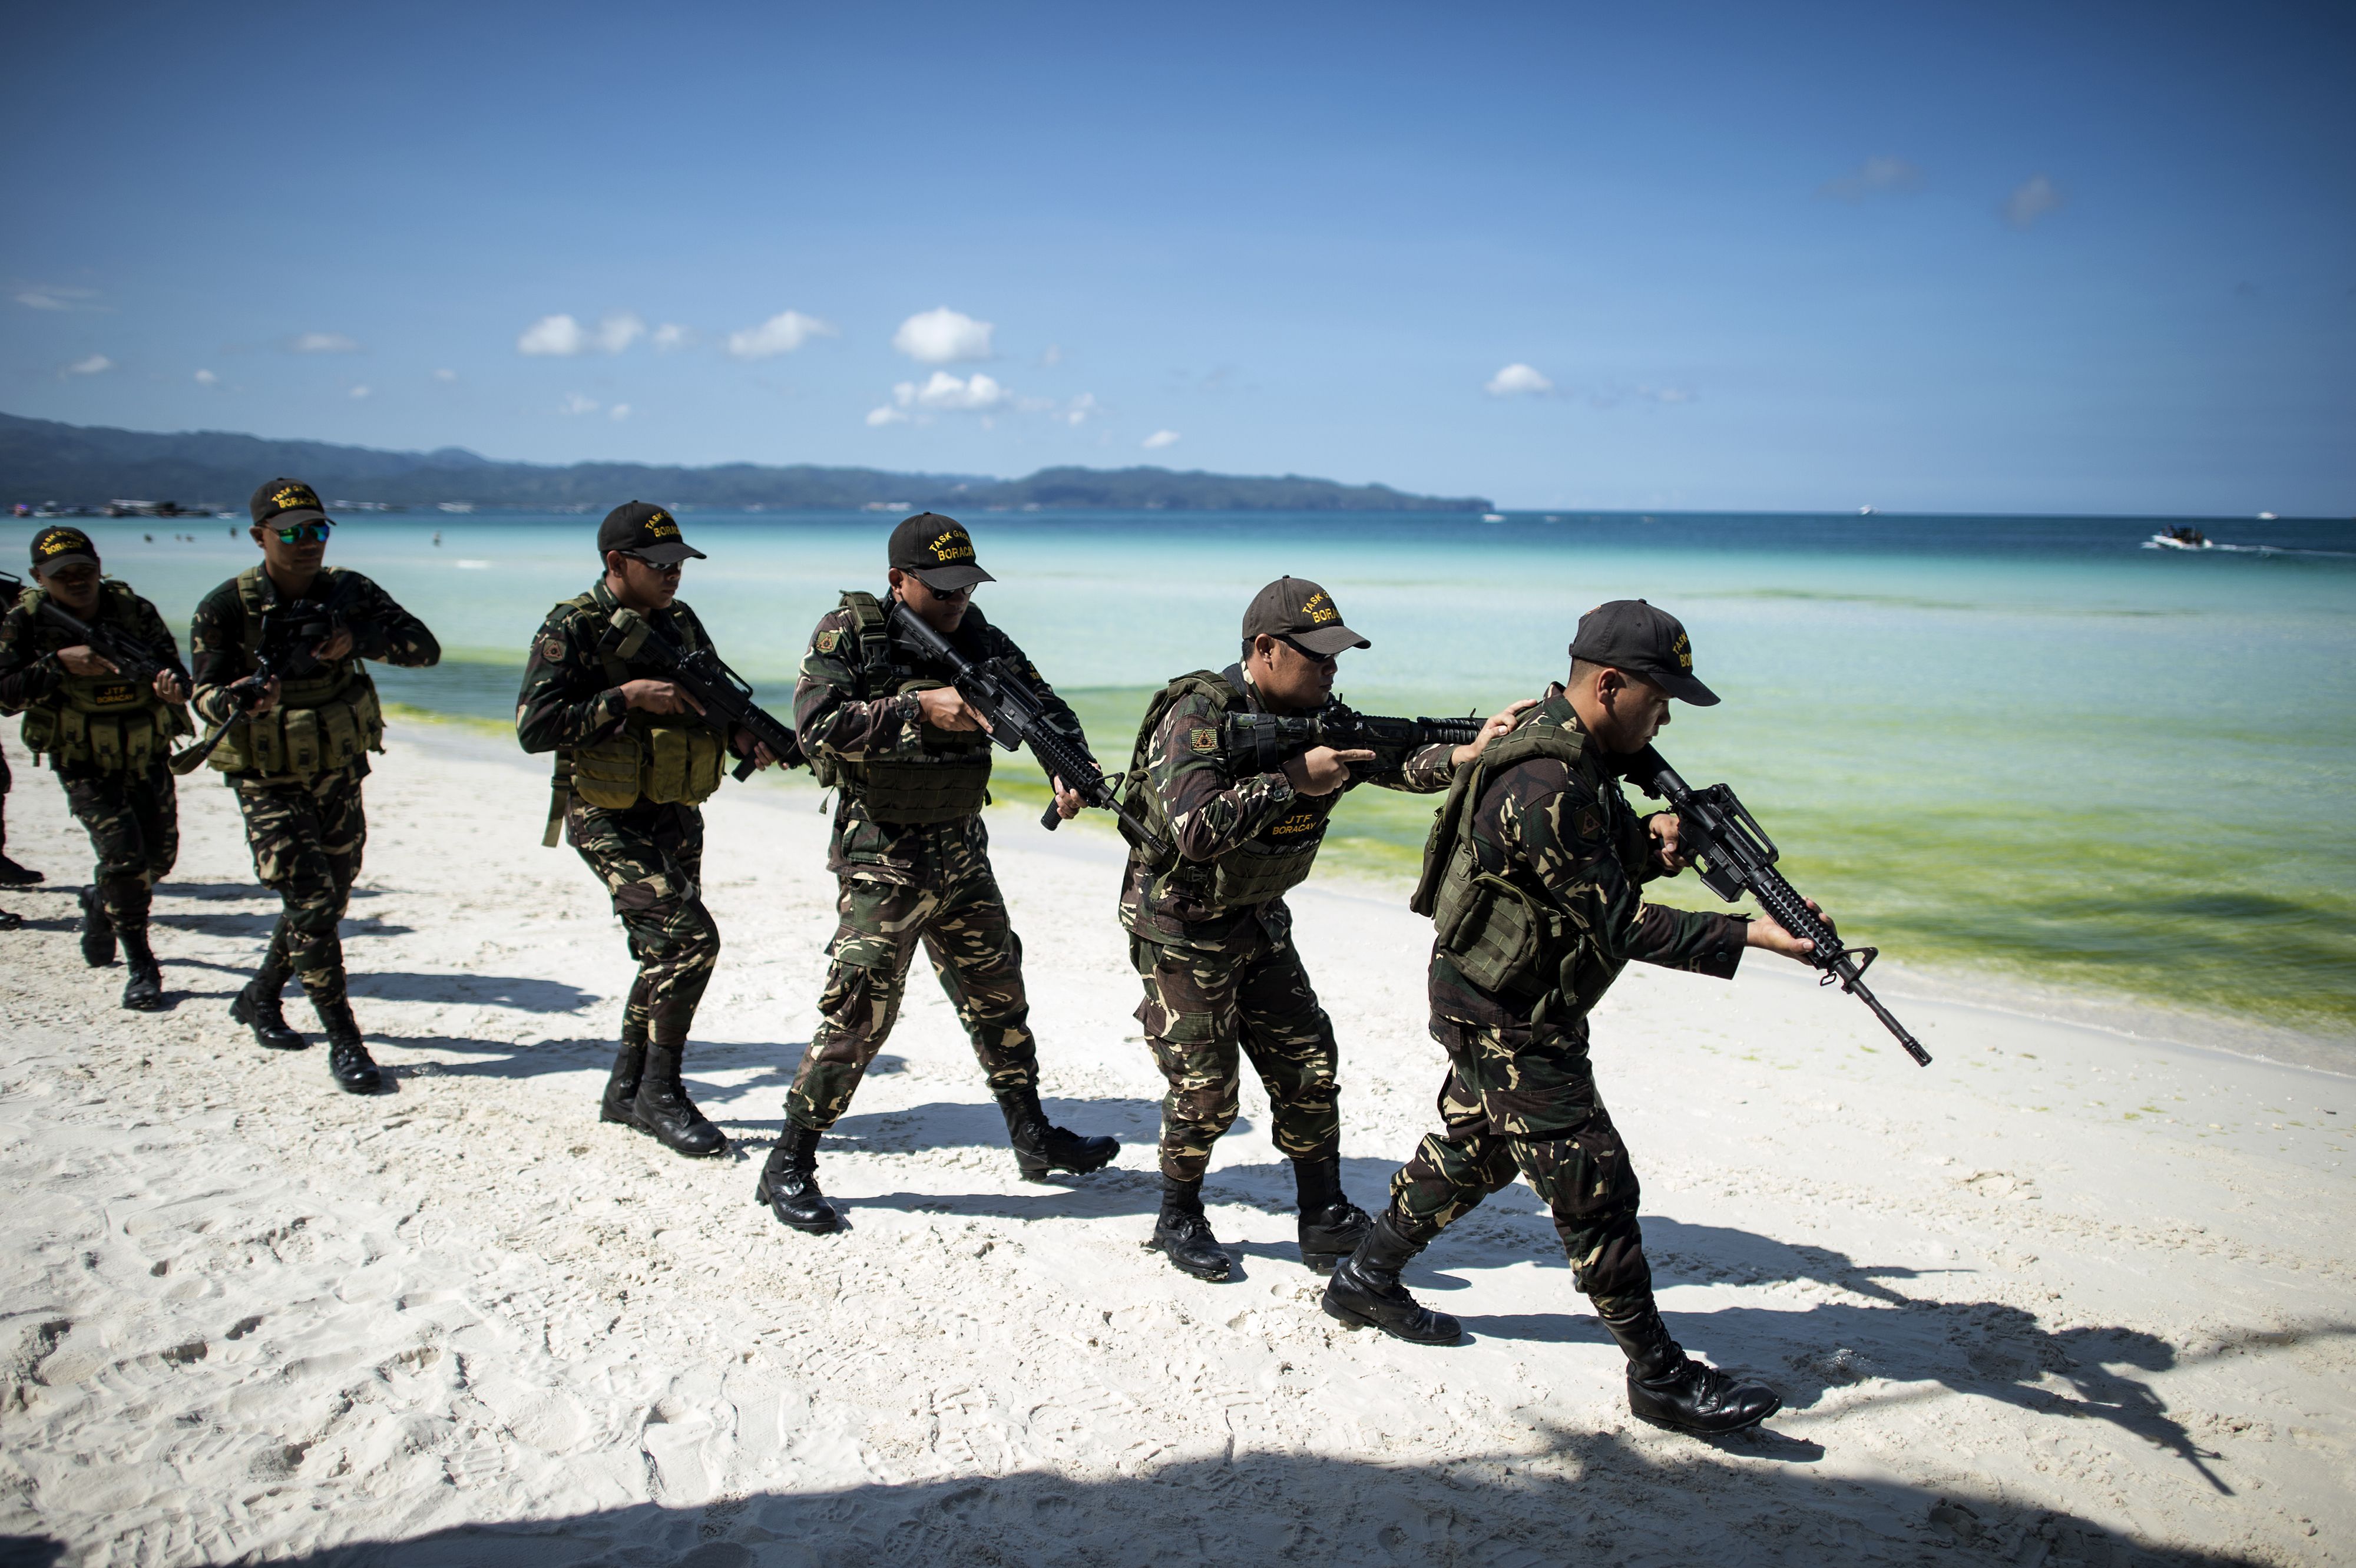 Policemen take part in a security measures exercise on the Philippine island of Boracay island on April 25, 2018. (NOEL CELIS—AFP/Getty Images)